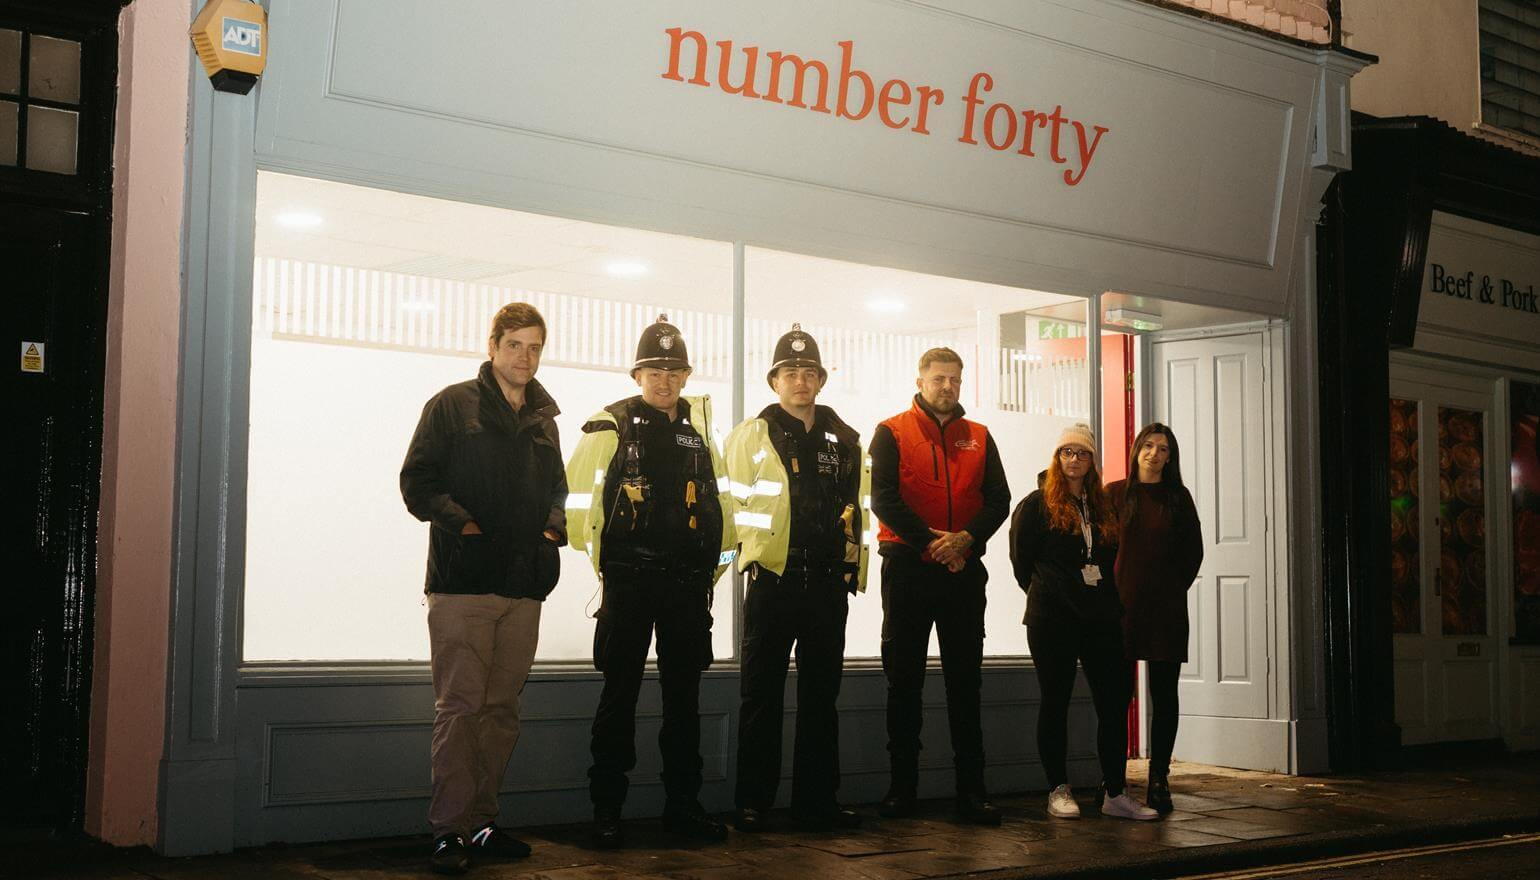 Number Forty provides safe space in  town centre